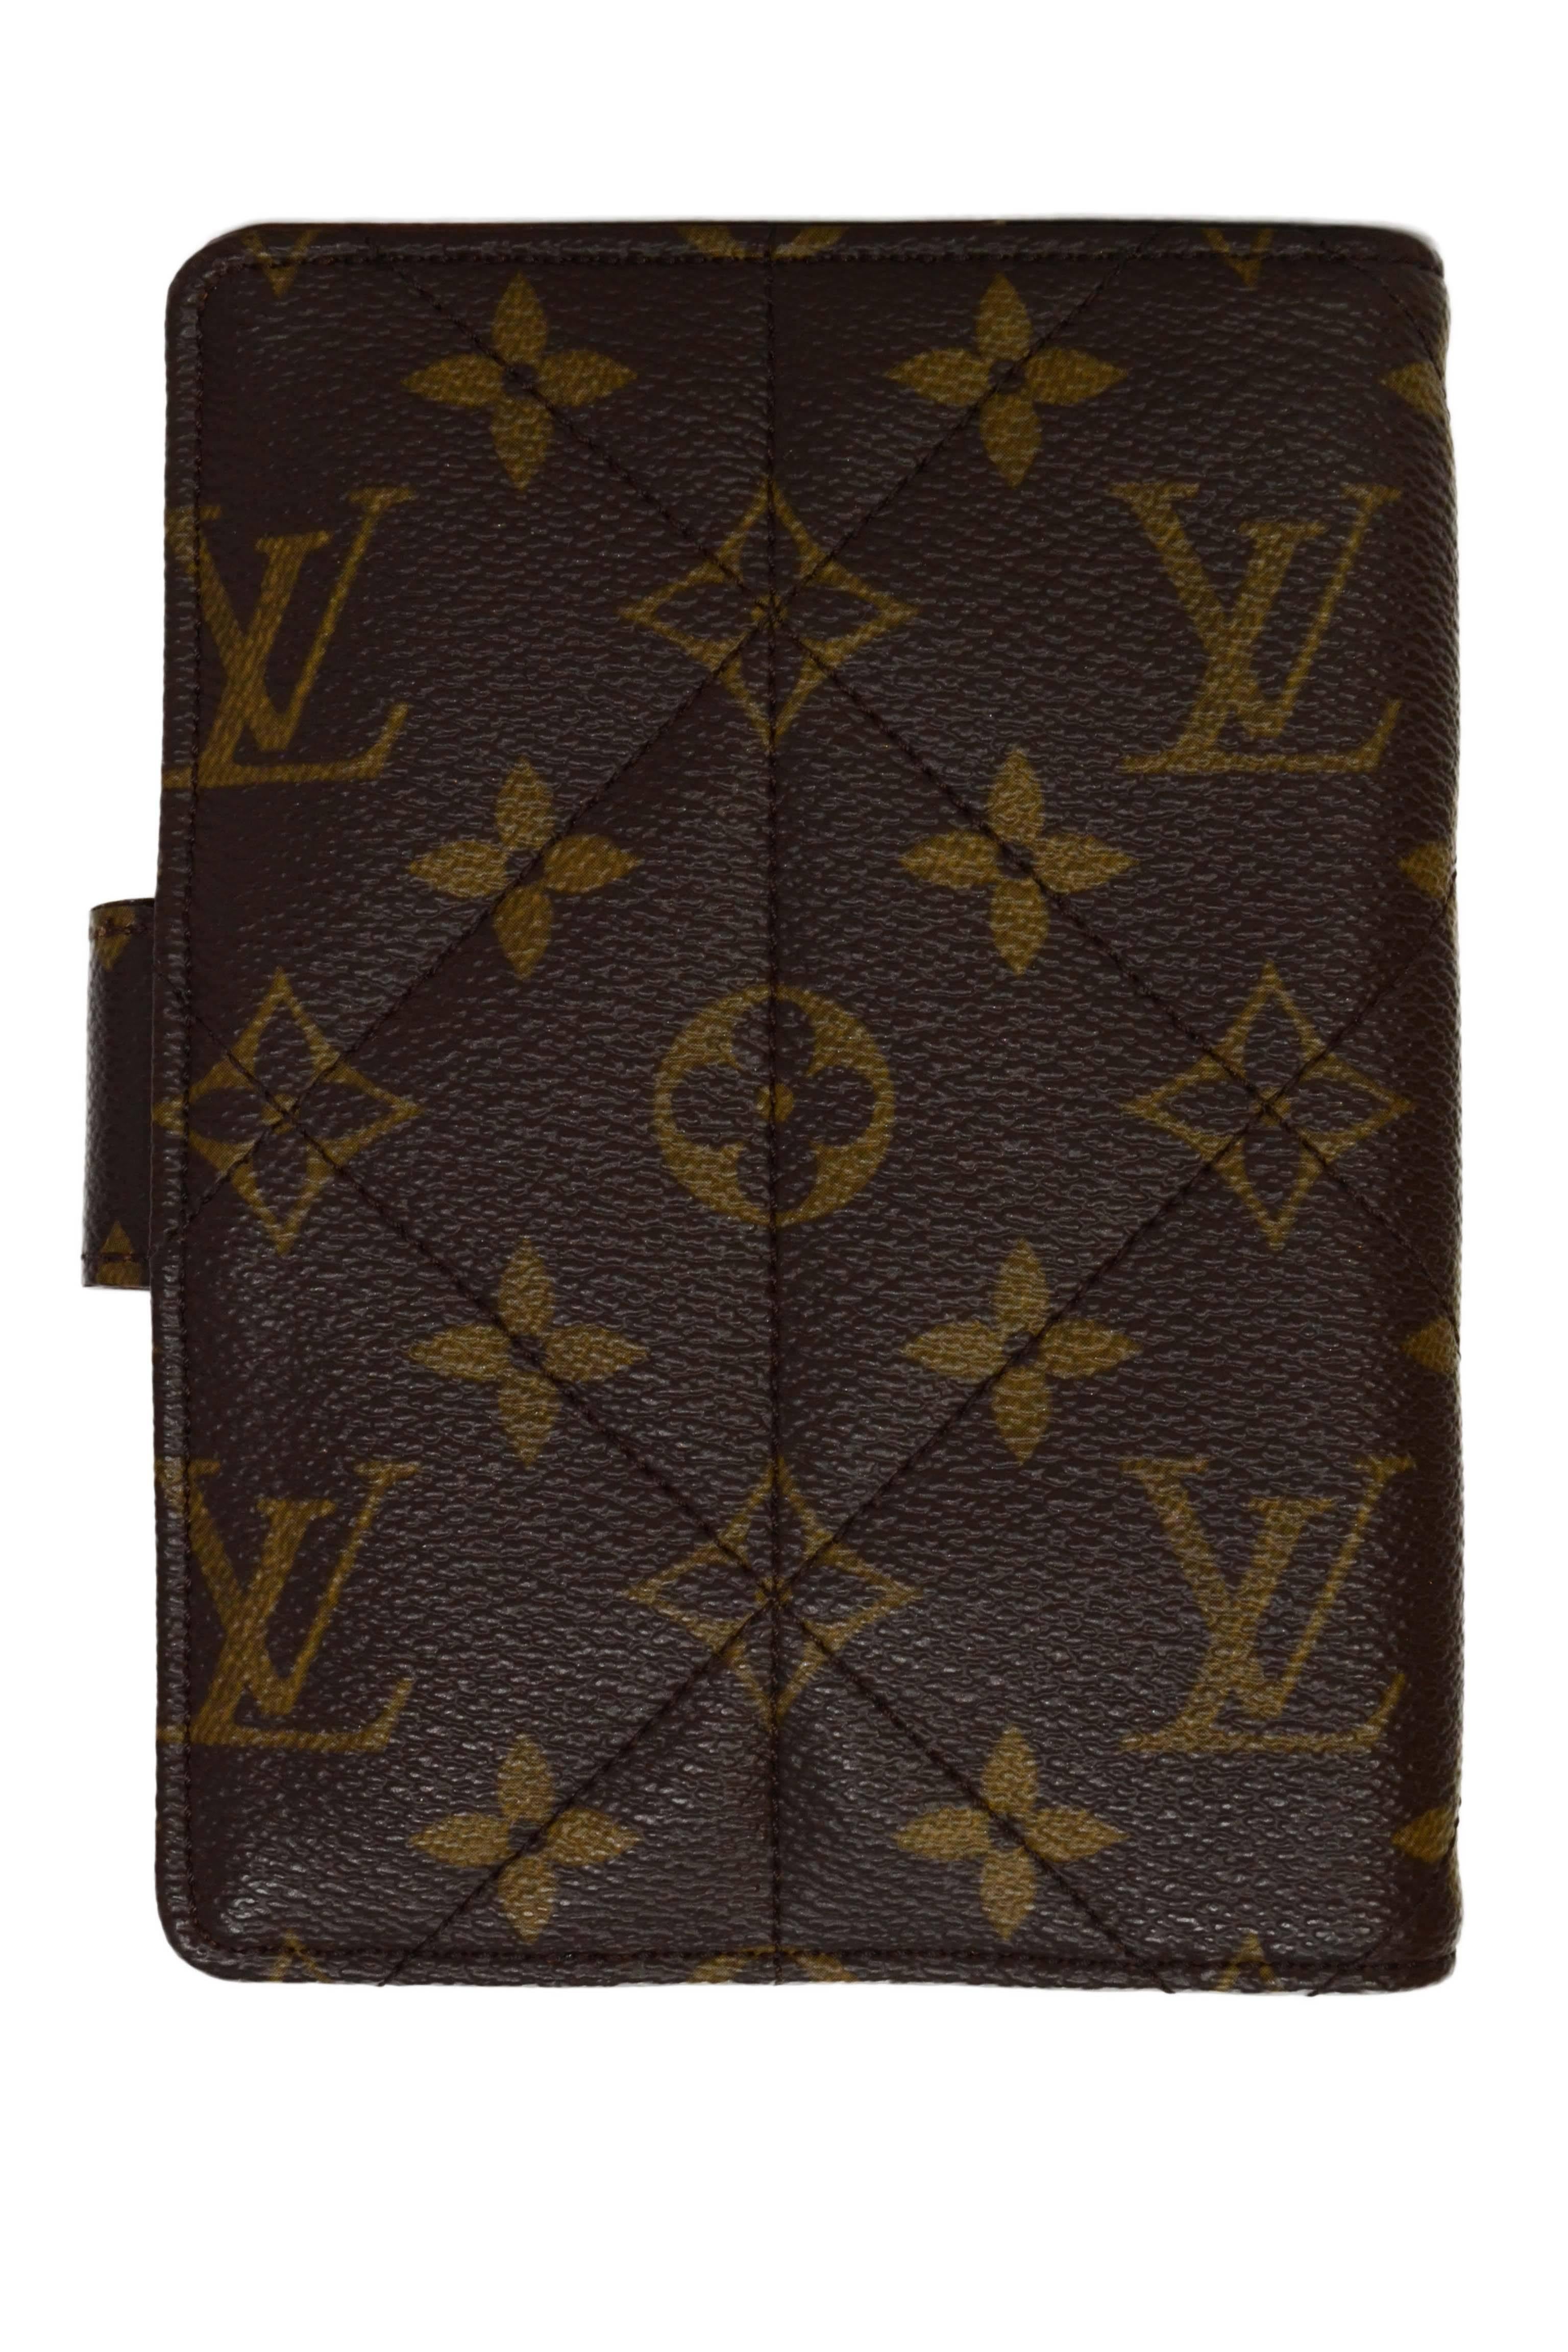 Louis Vuitton Monogram Canvas Etoile Small Agenda Cover GHW In Excellent Condition In New York, NY